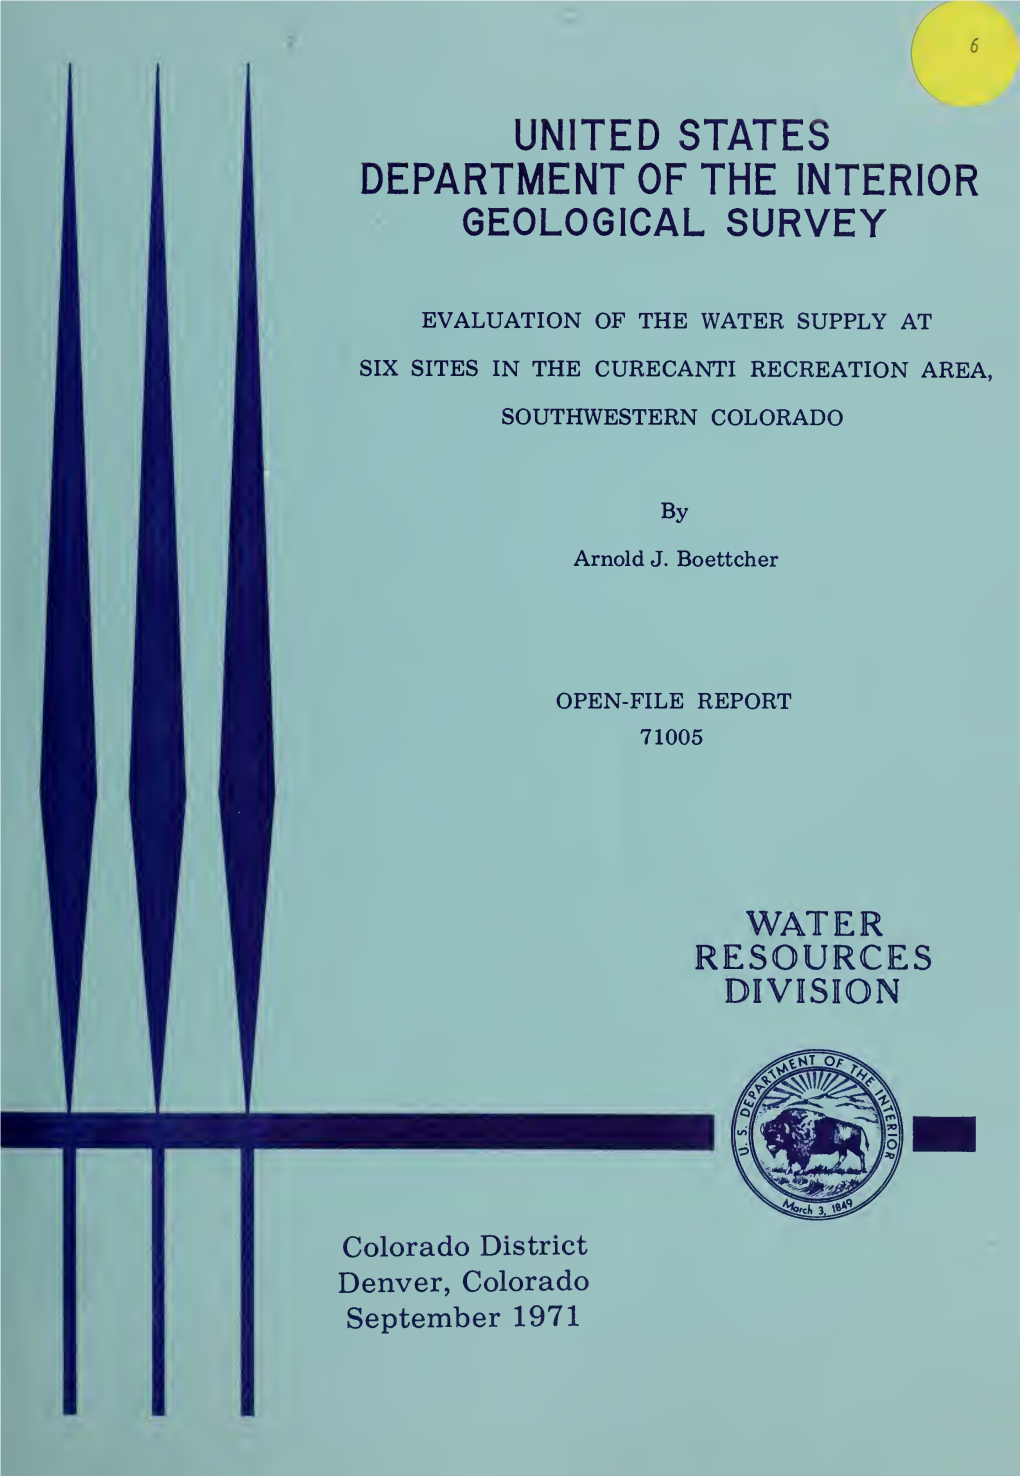 Evaluation of the Water Supply at Six Sites in the Curecanti Recreation Area, Southwestern Colorado